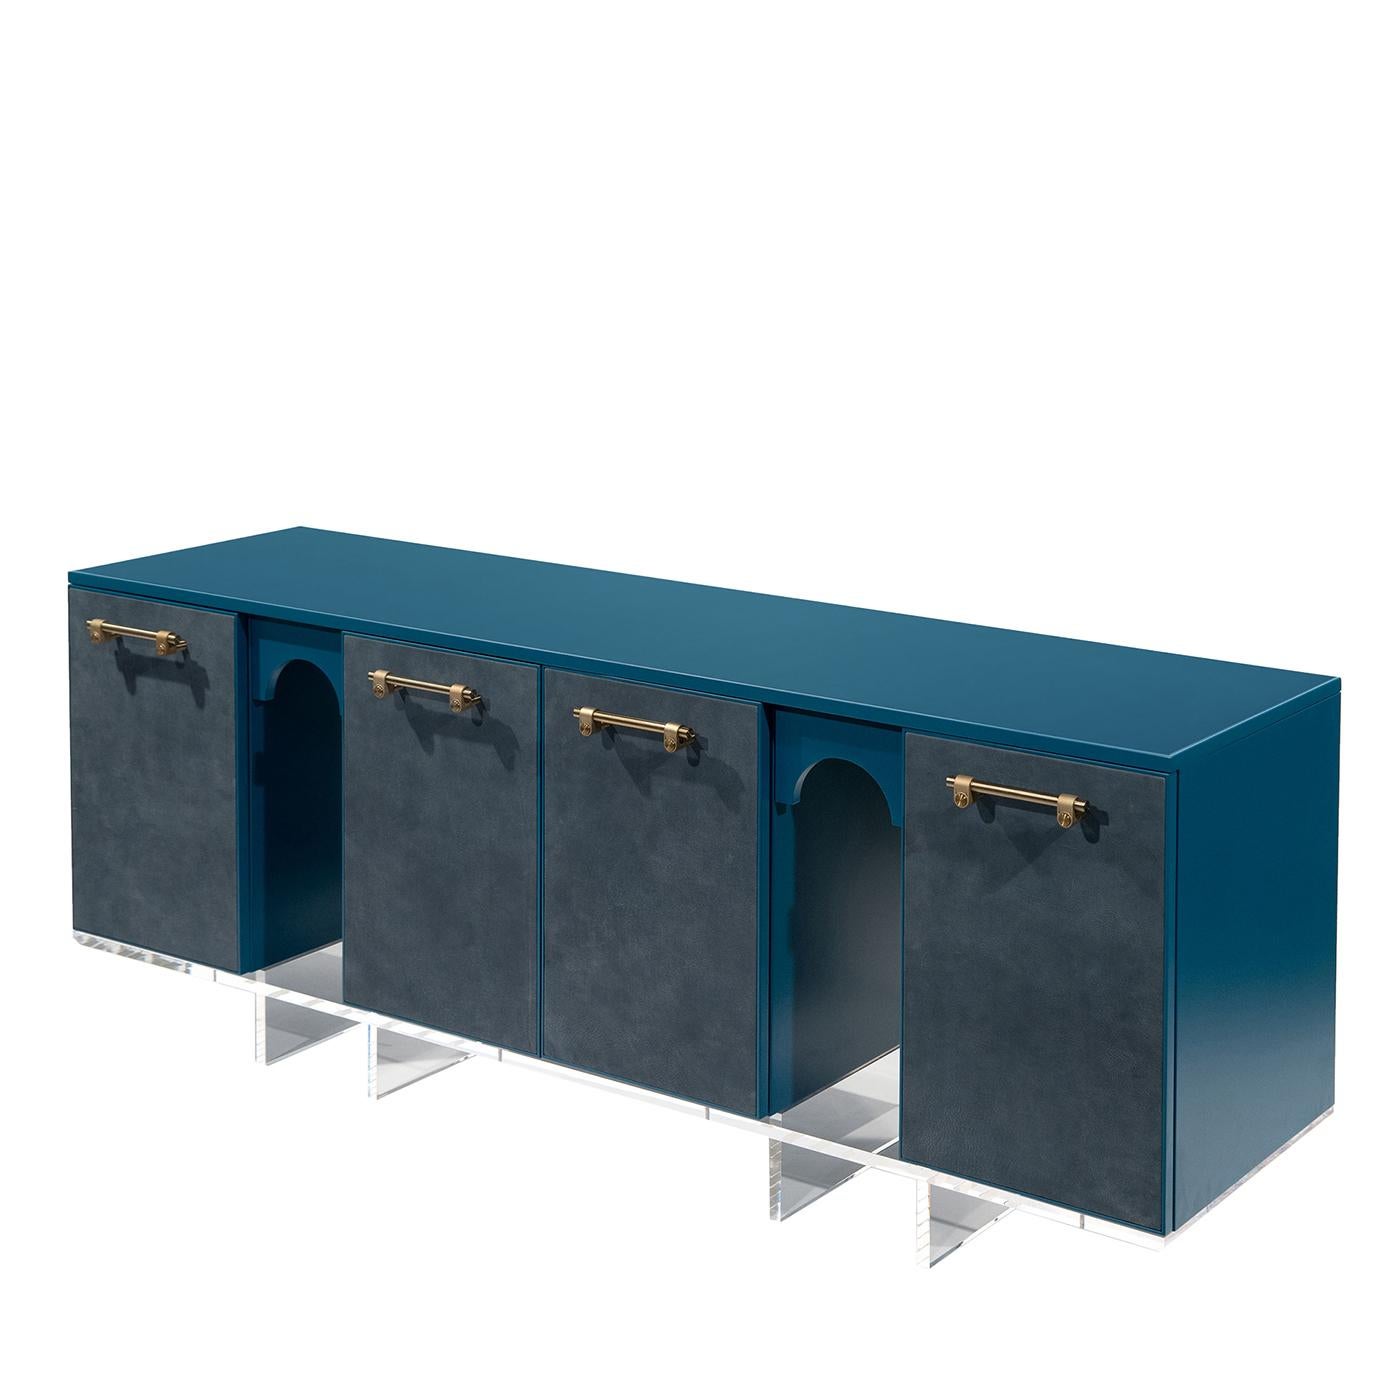 Santorini is more than just a cupboard, it is a testament to craftsmanship and elegant materials. Enveloped in captivating Azure blue (RAL 5009), it conjures the depths of the Mediterranean Sea with its chromatic richness. The Maya Pacific 7312